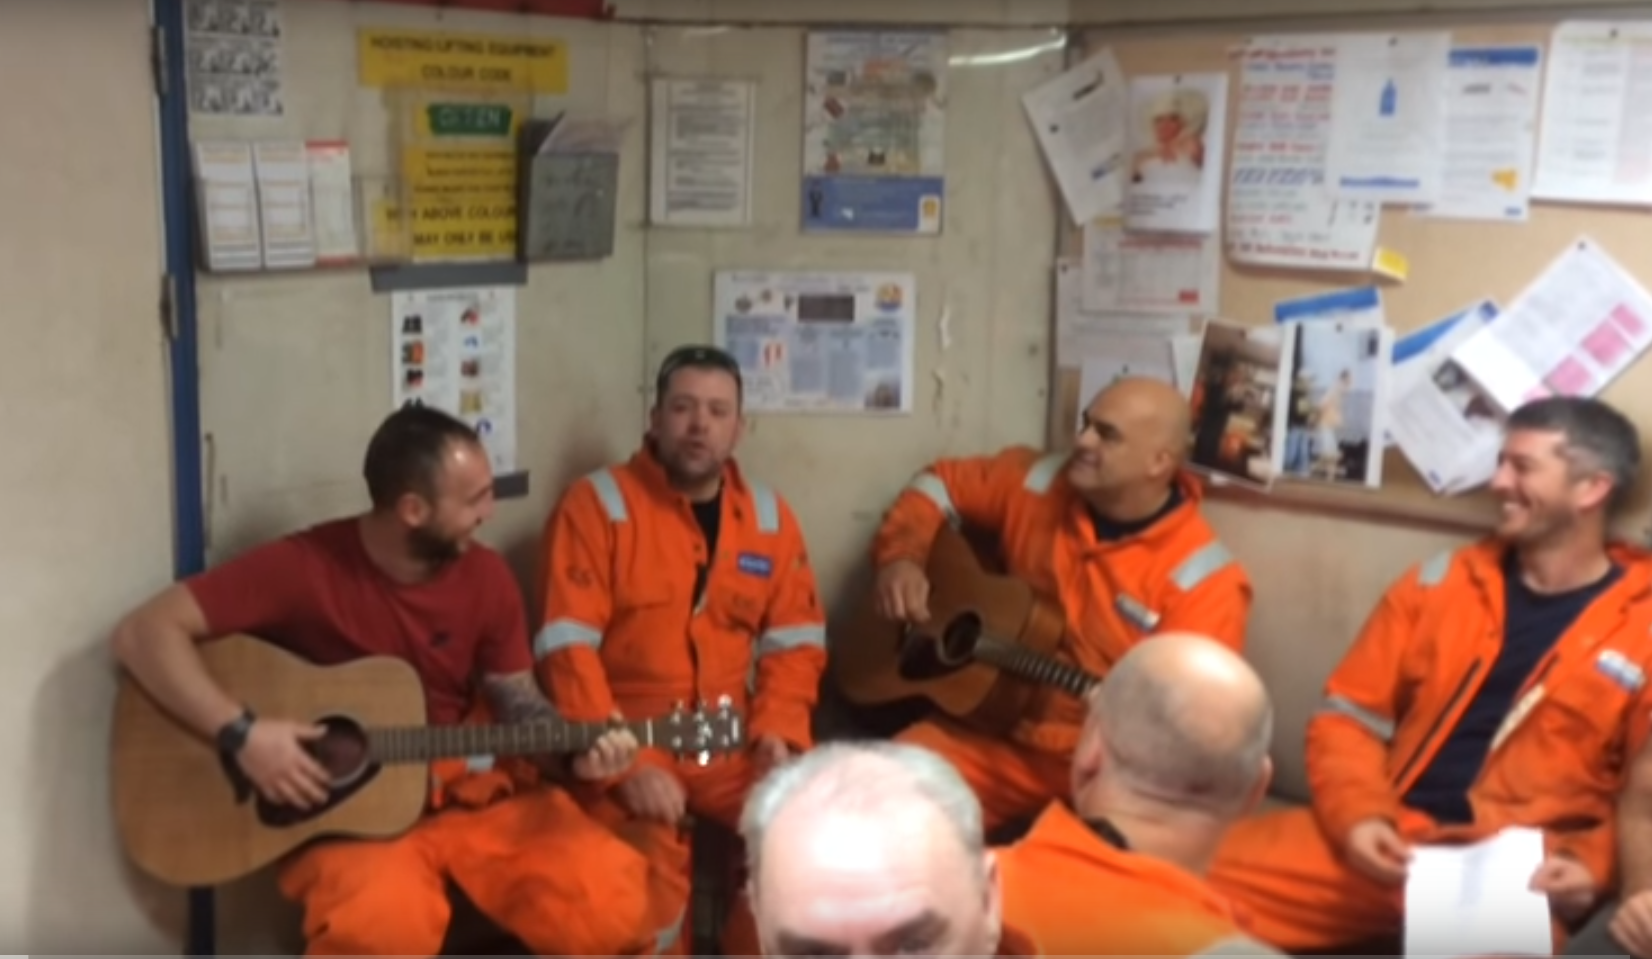 Last year the crew of the Brent Delta took on Oasis